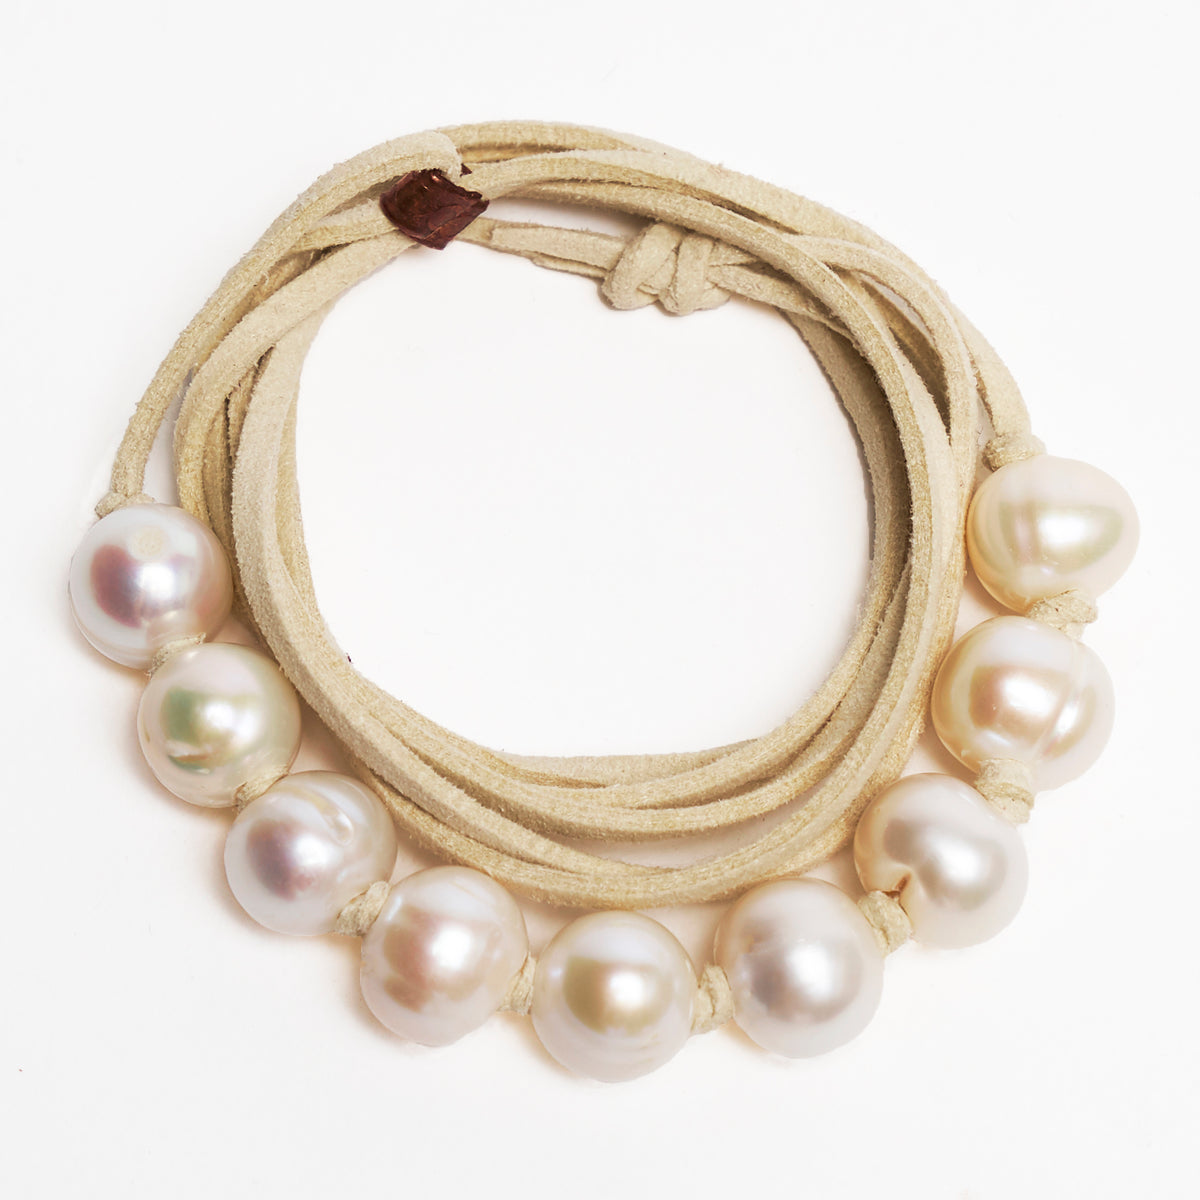 She Walks with Aphrodite: Pearls on Leather